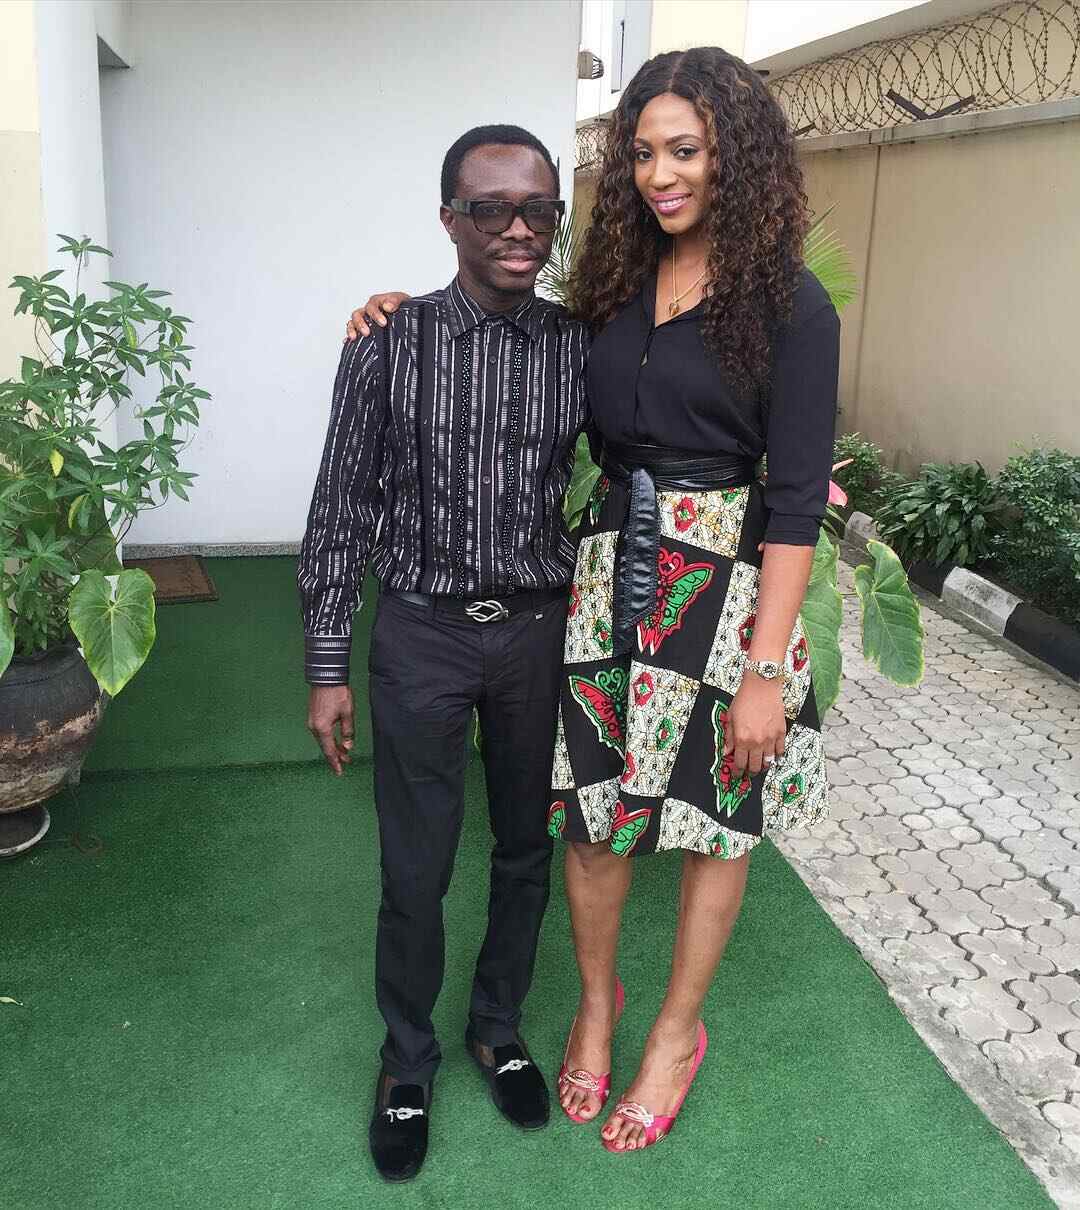 She said she was tired - Julius Agwu confirms he and his wife have separated